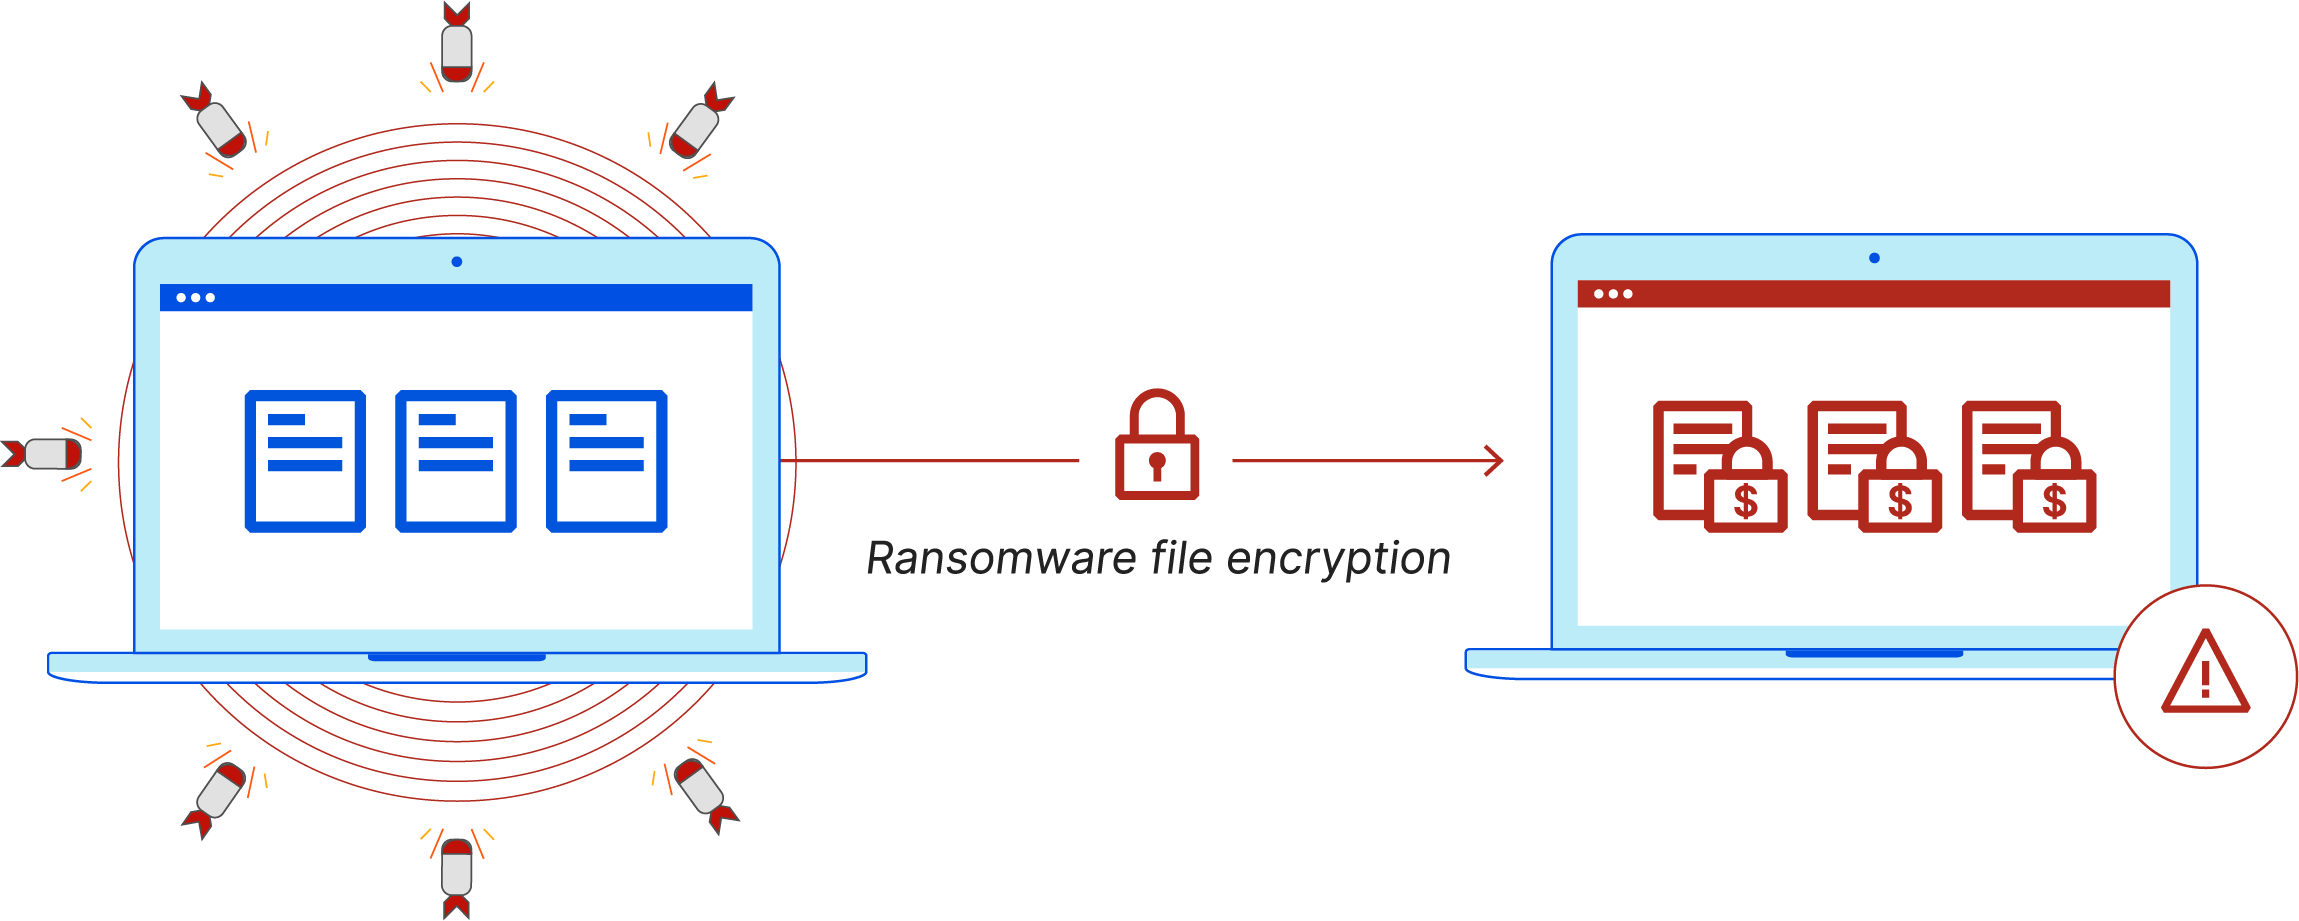 What is ransomware? - Ransomware infects a computer and encrypts files